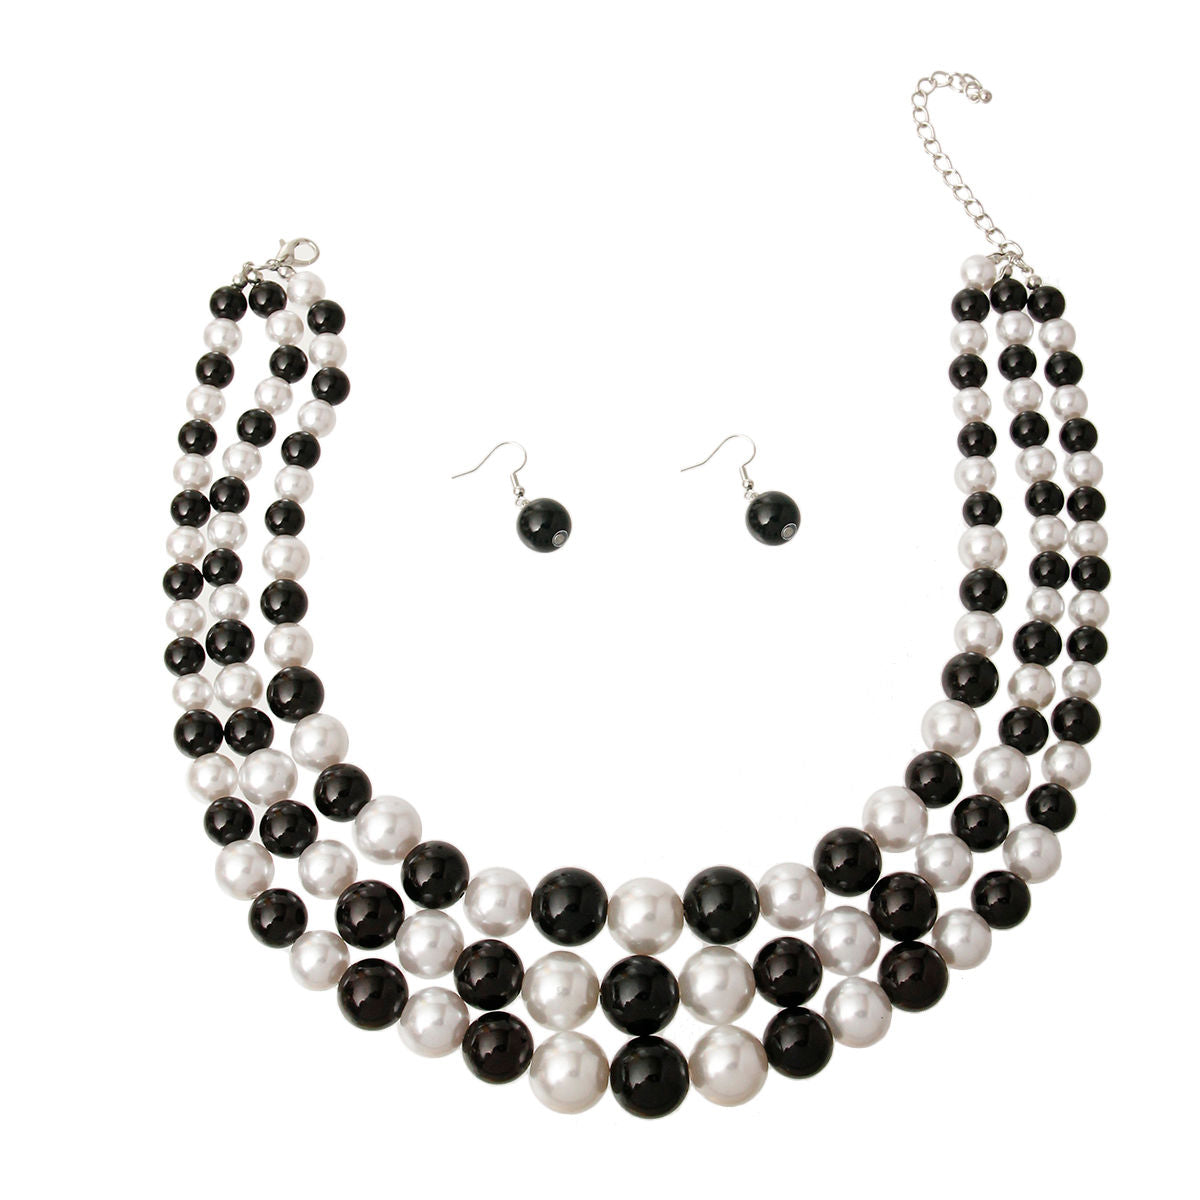 Black and White Multi Strand Pearl Necklace Set